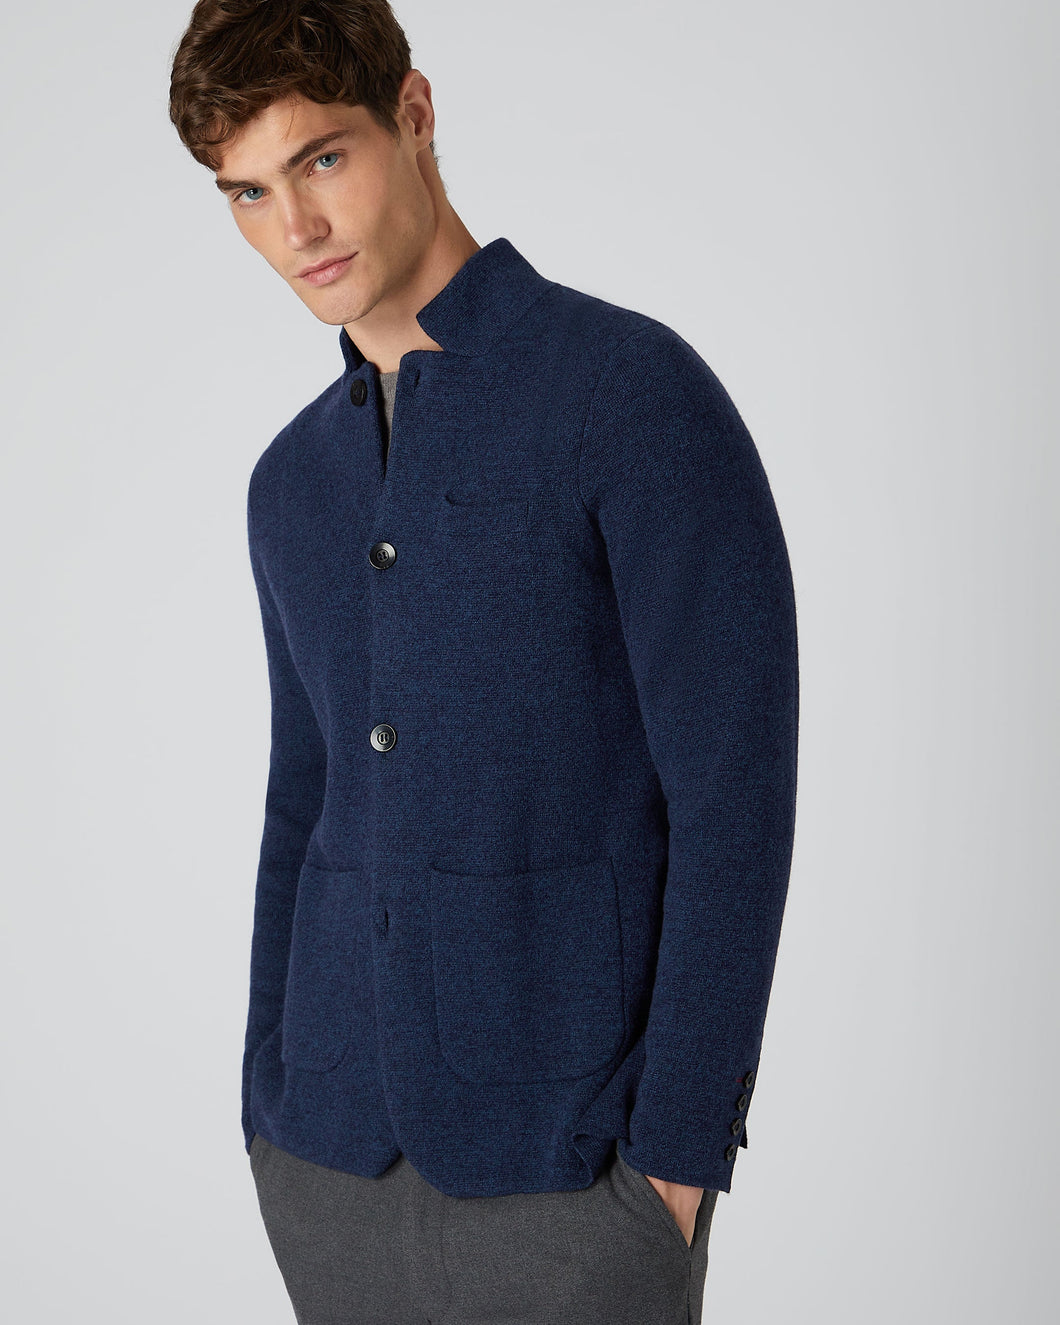 N.Peal Men's Milano Cashmere Jacket Imperial Blue